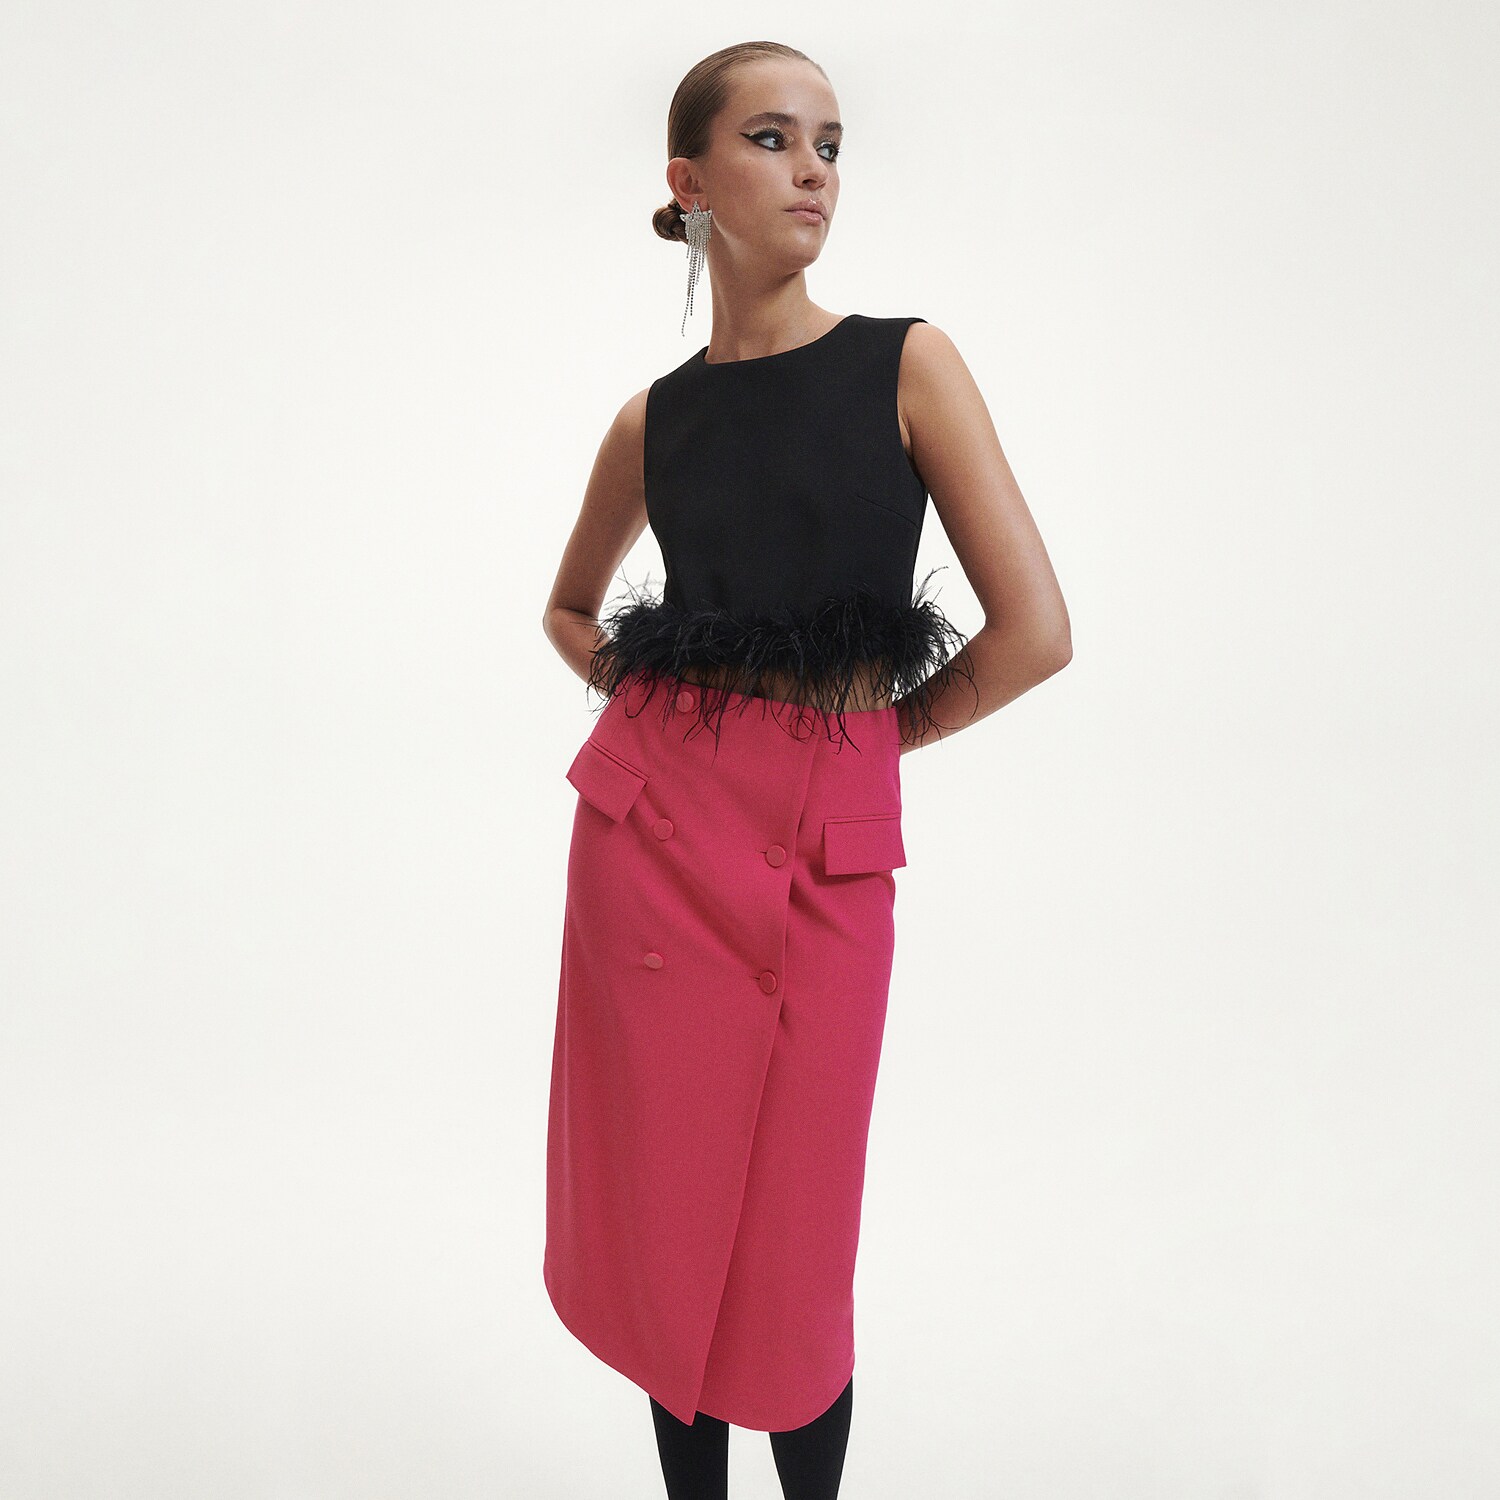 Reserved – Ladies` skirt – Roz clothes imagine noua 2022